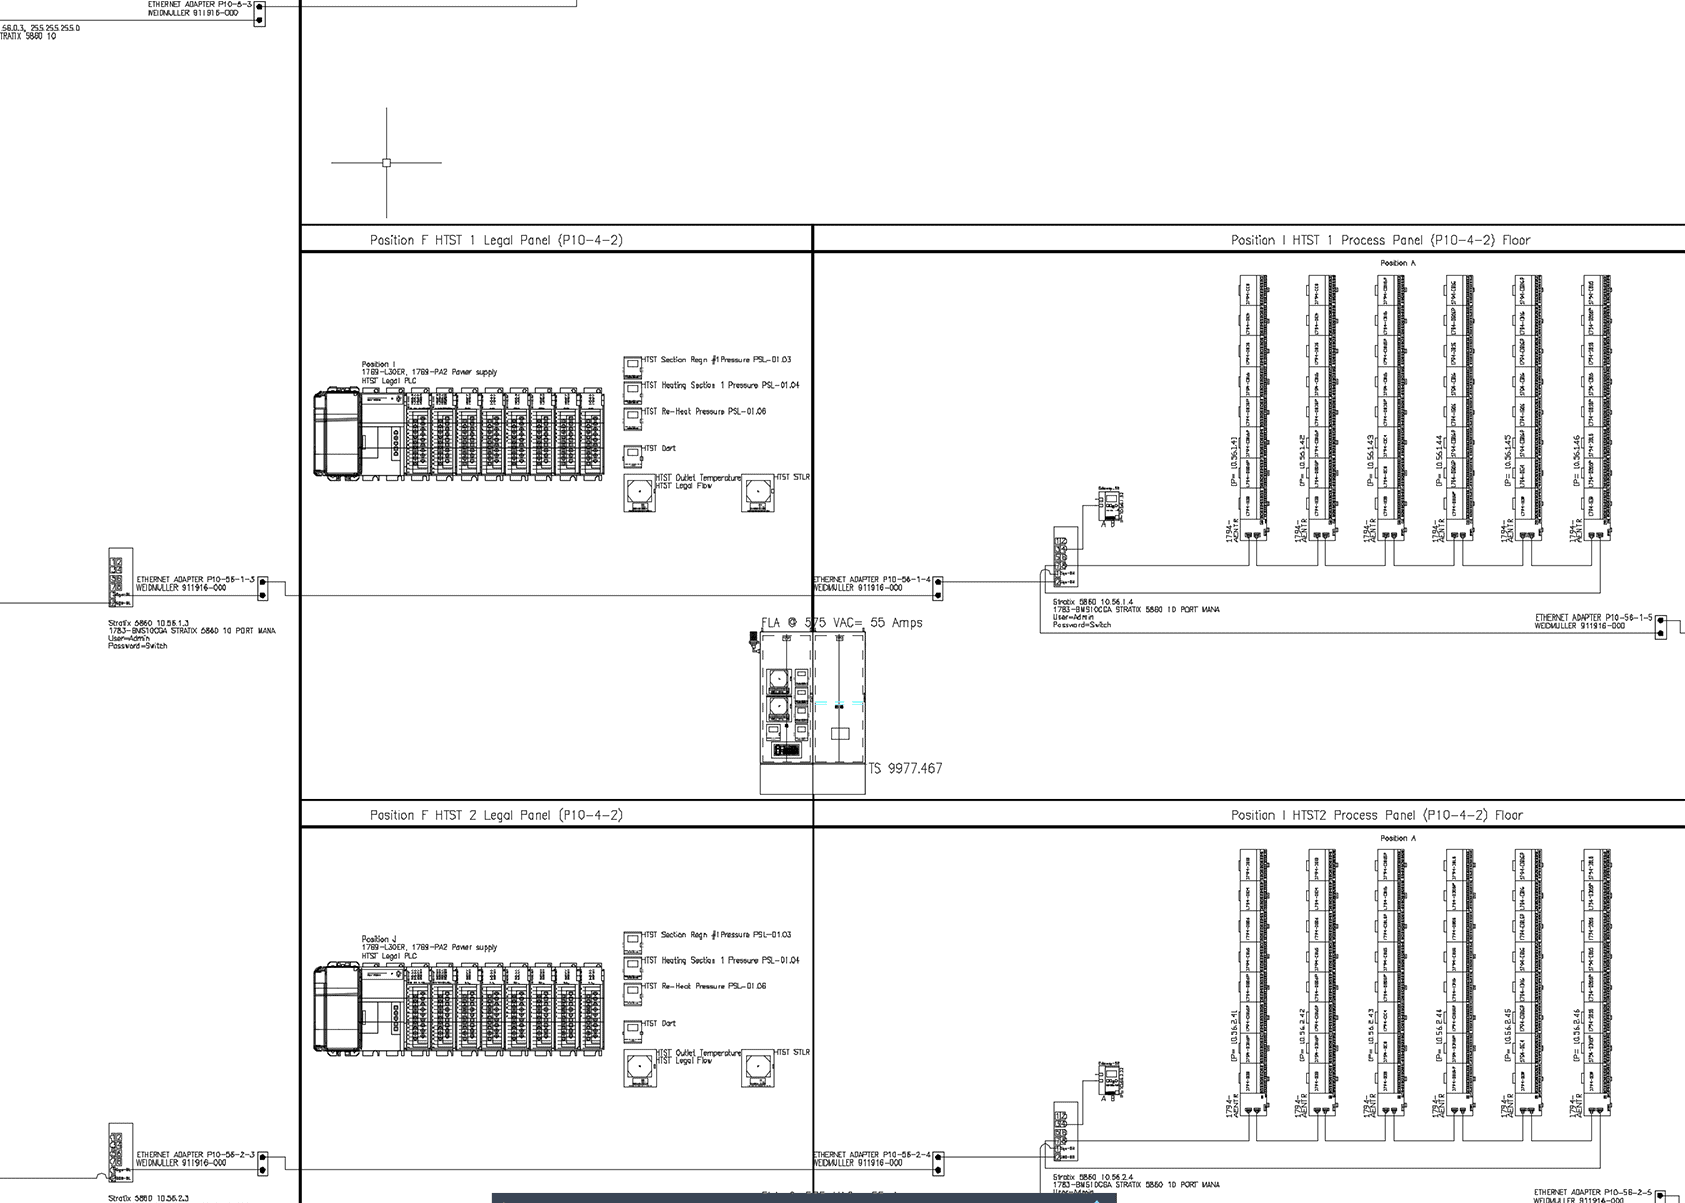 Network Drawing with Legal Panels